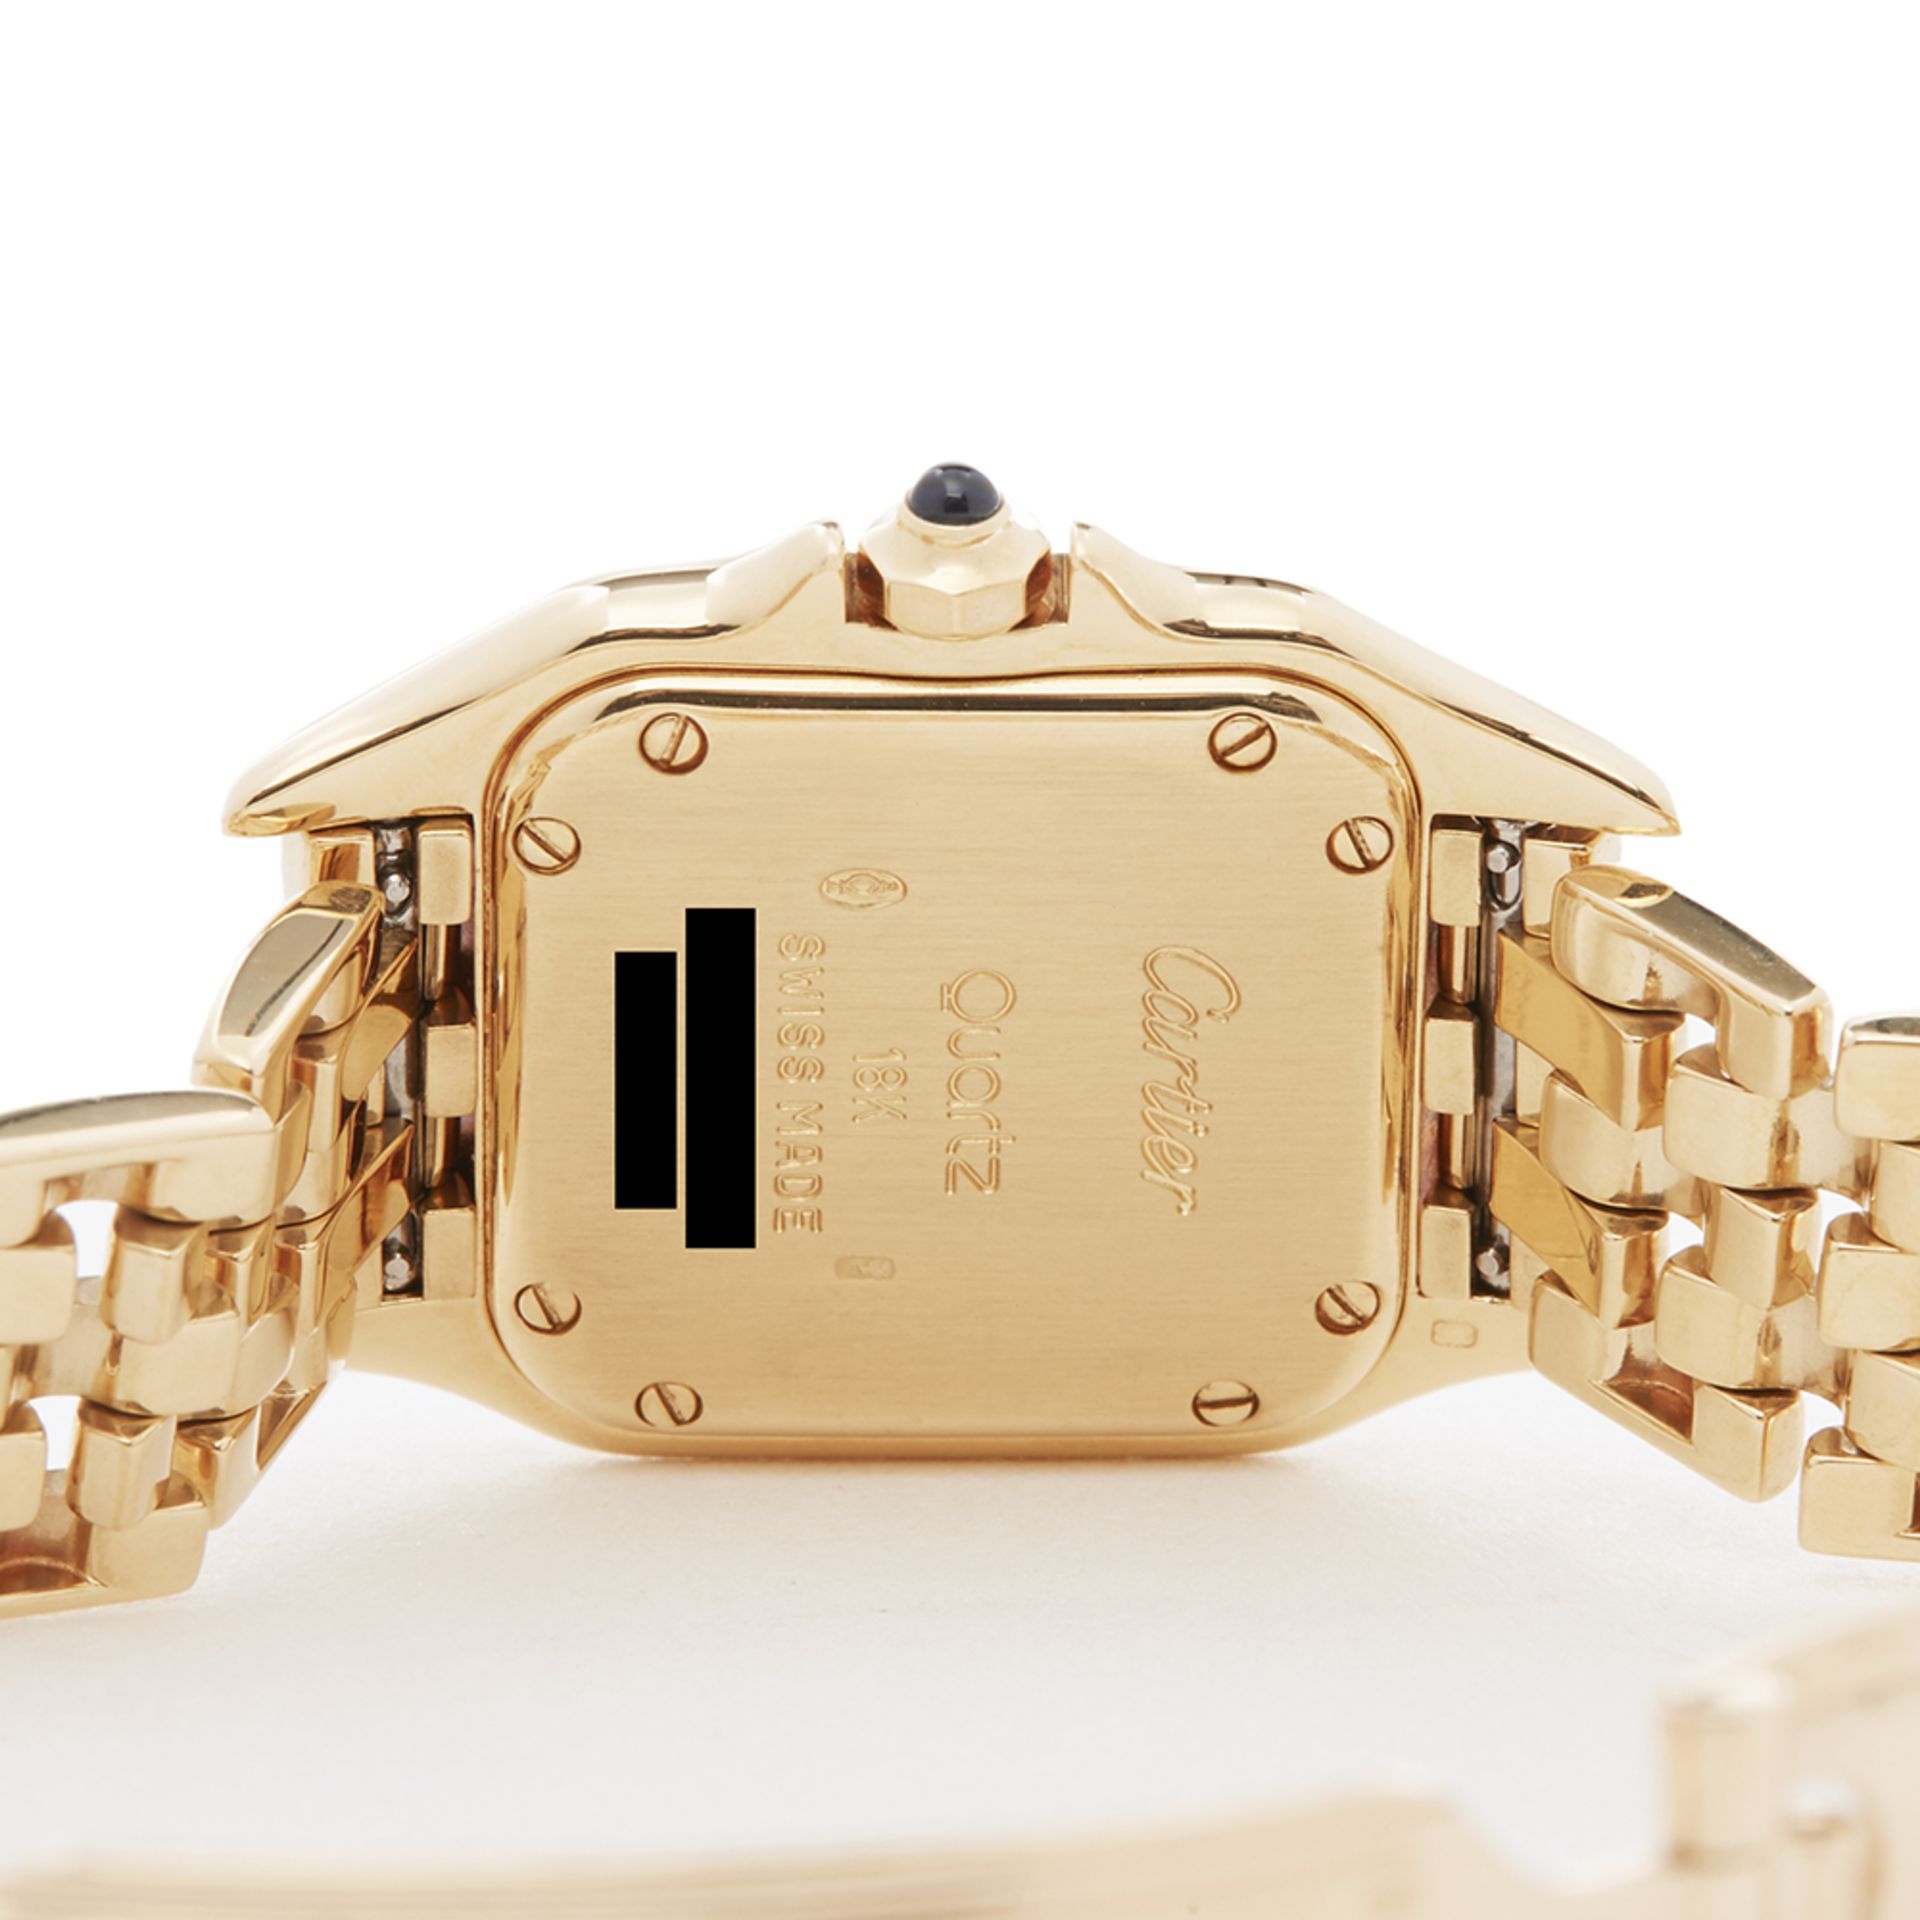 Cartier Panthère 18K Yellow Gold - W25022B9 - Image 7 of 7